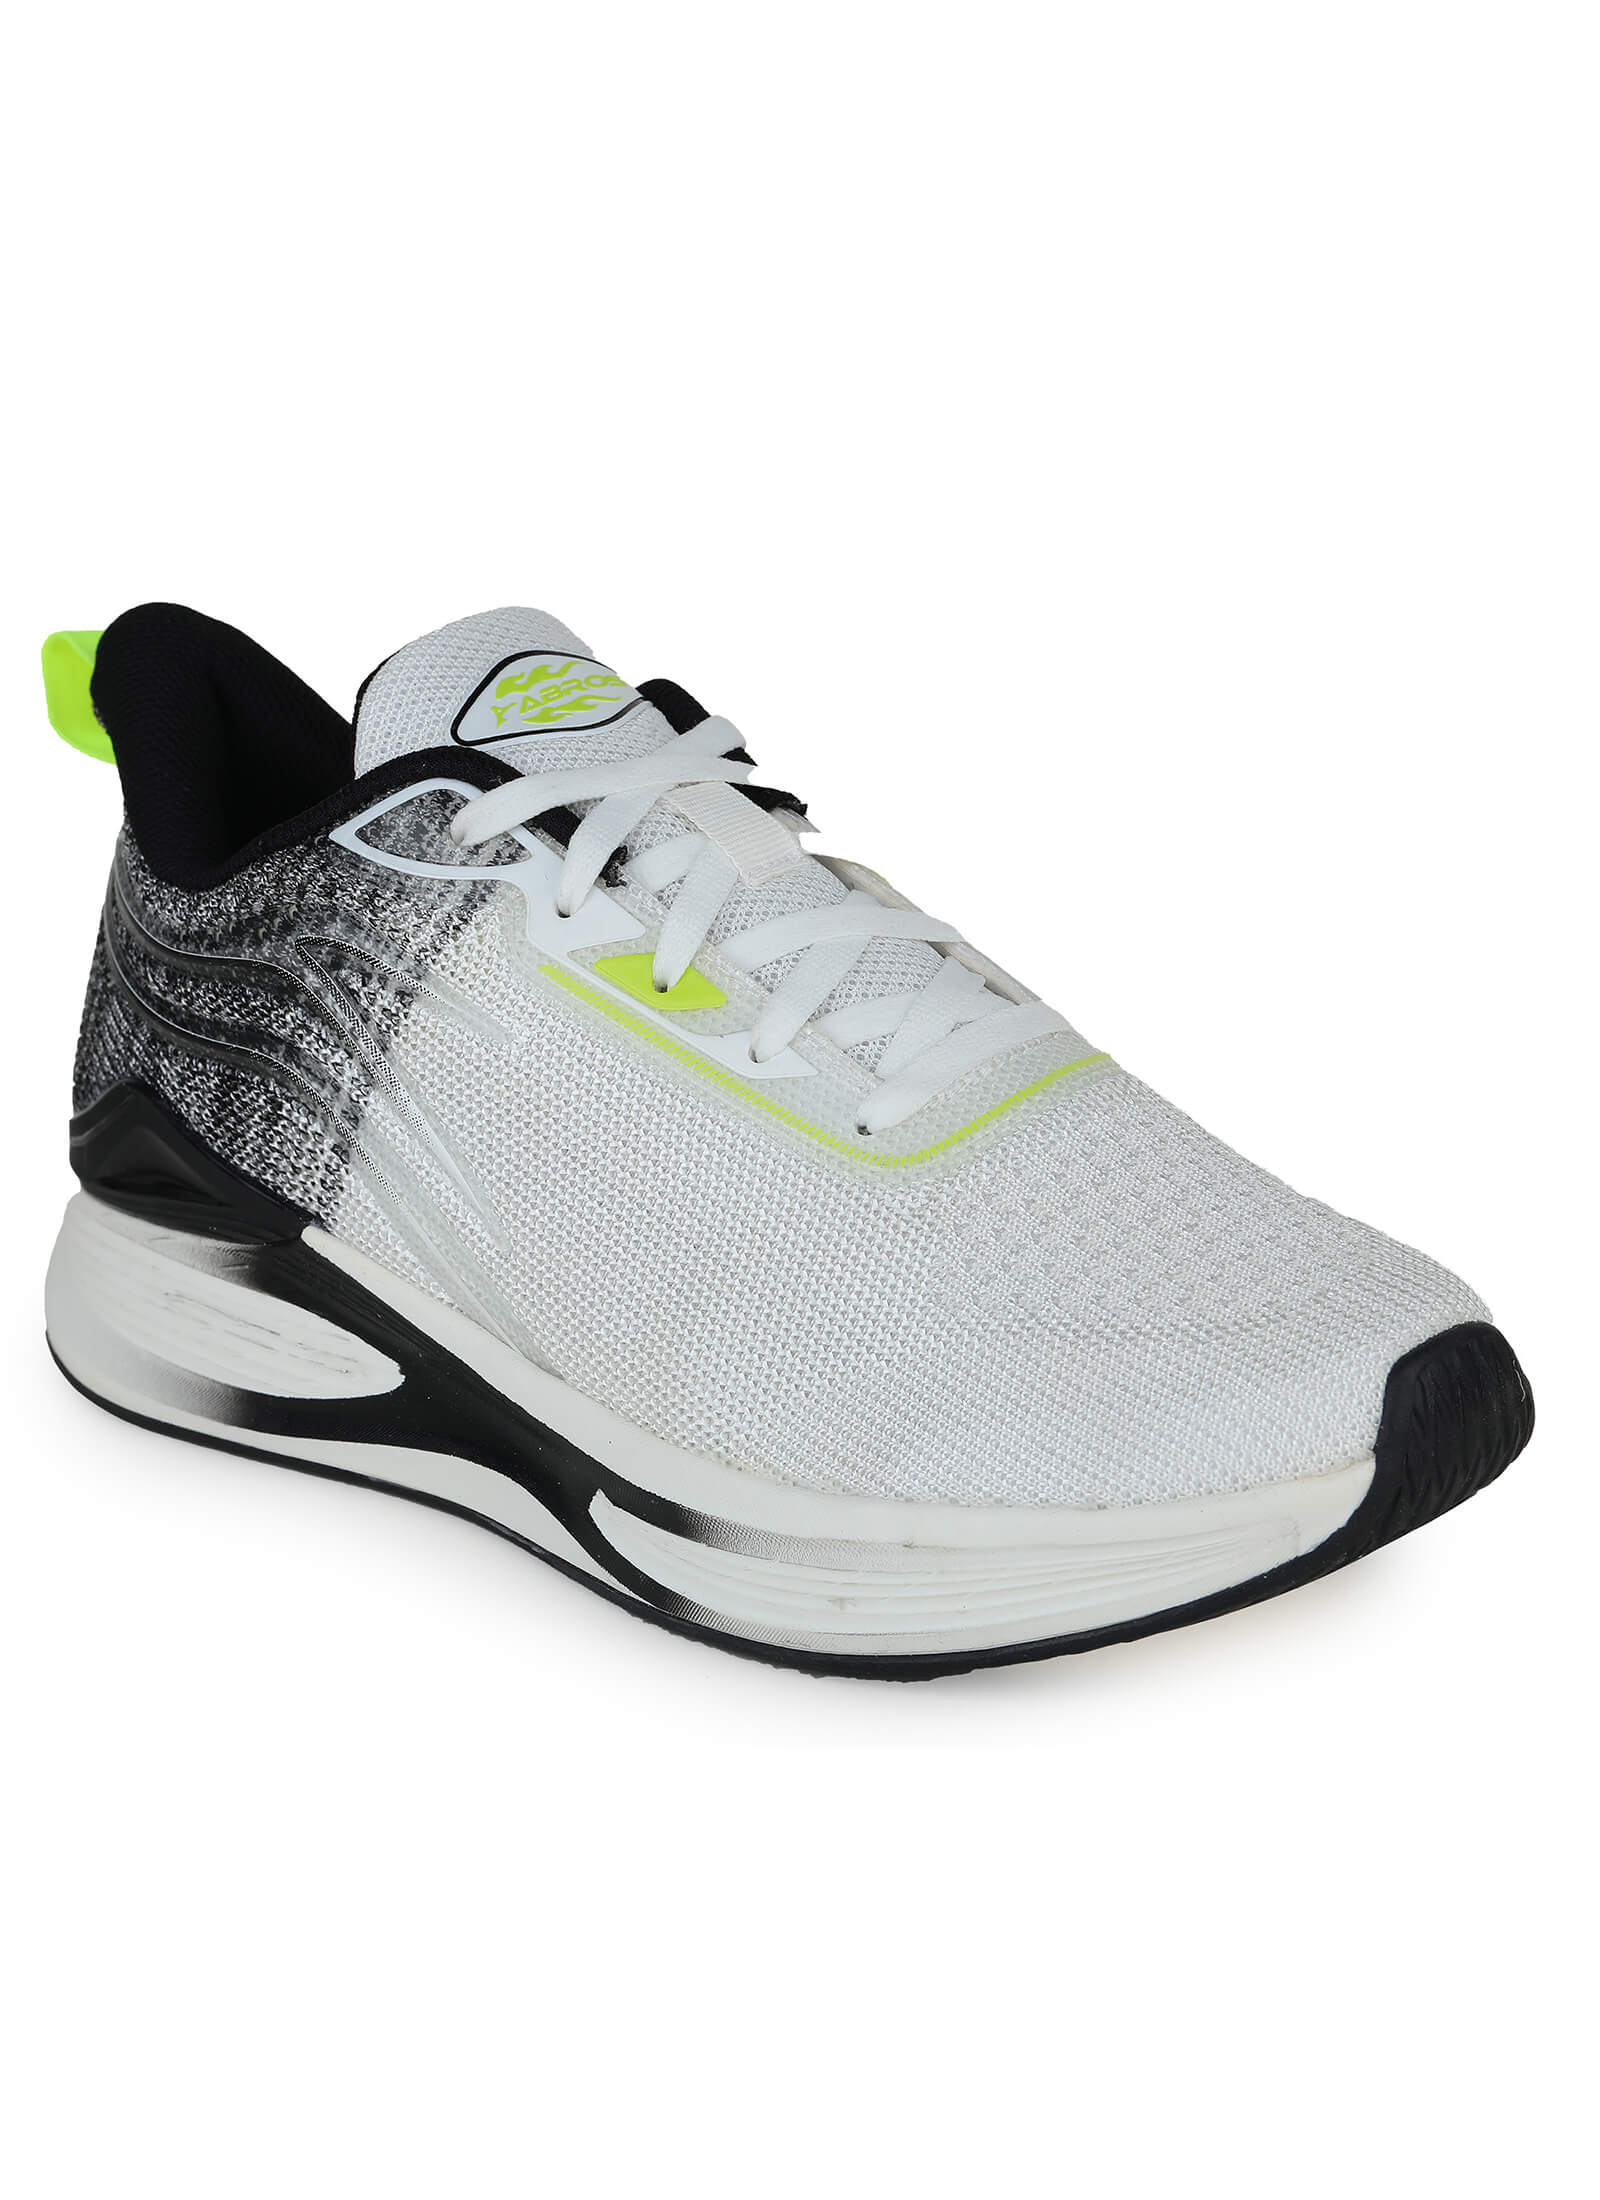 Dynamic Sports Shoes For Men